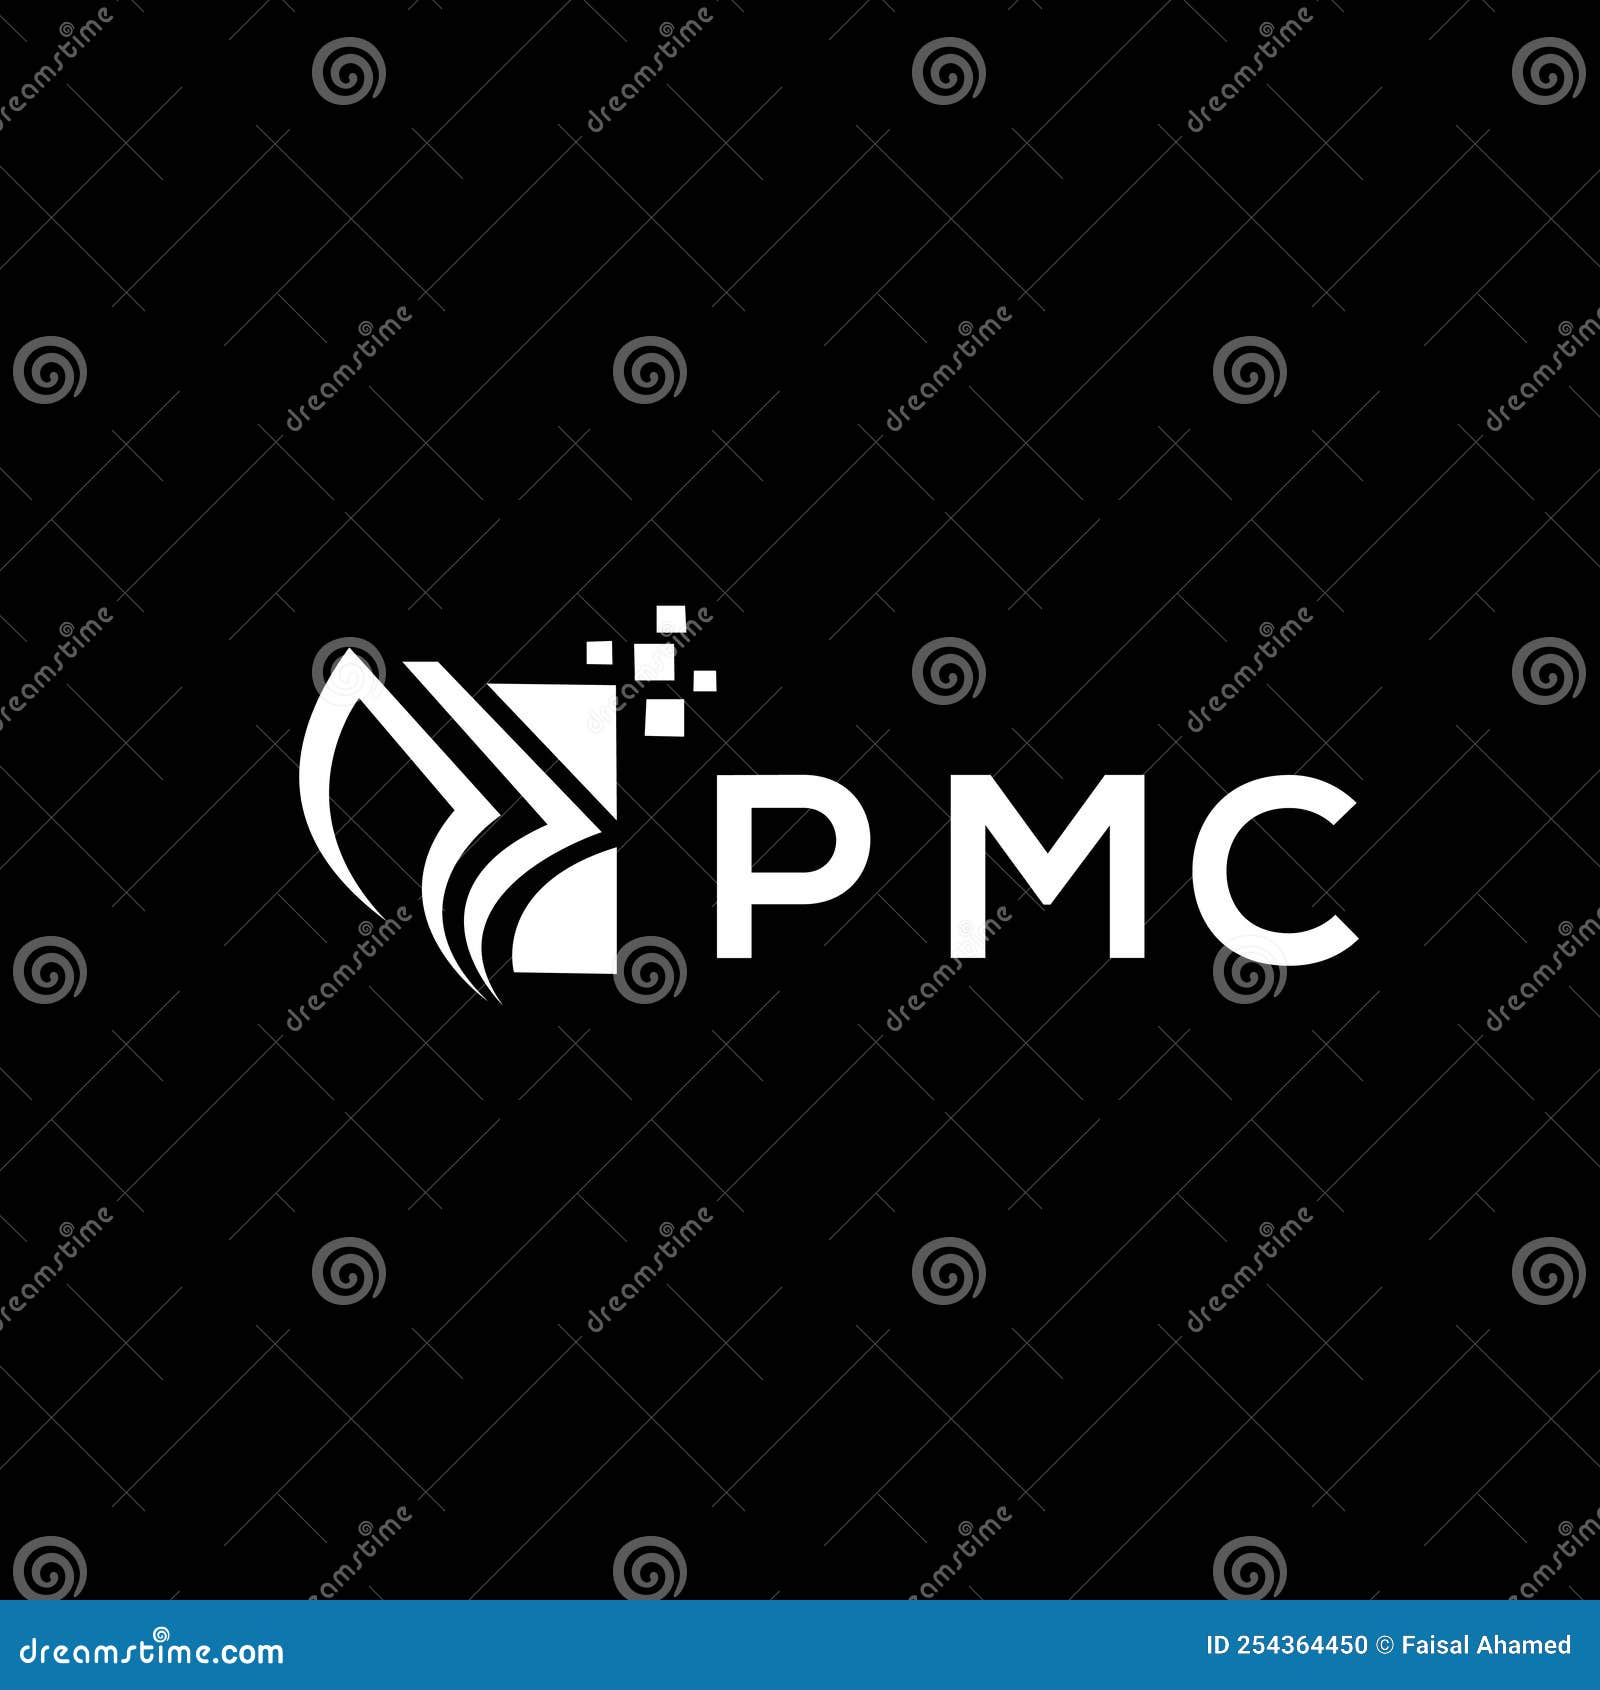 pmc credit repair accounting logo  on black background. pmc creative initials growth graph letter logo concept. pmc business